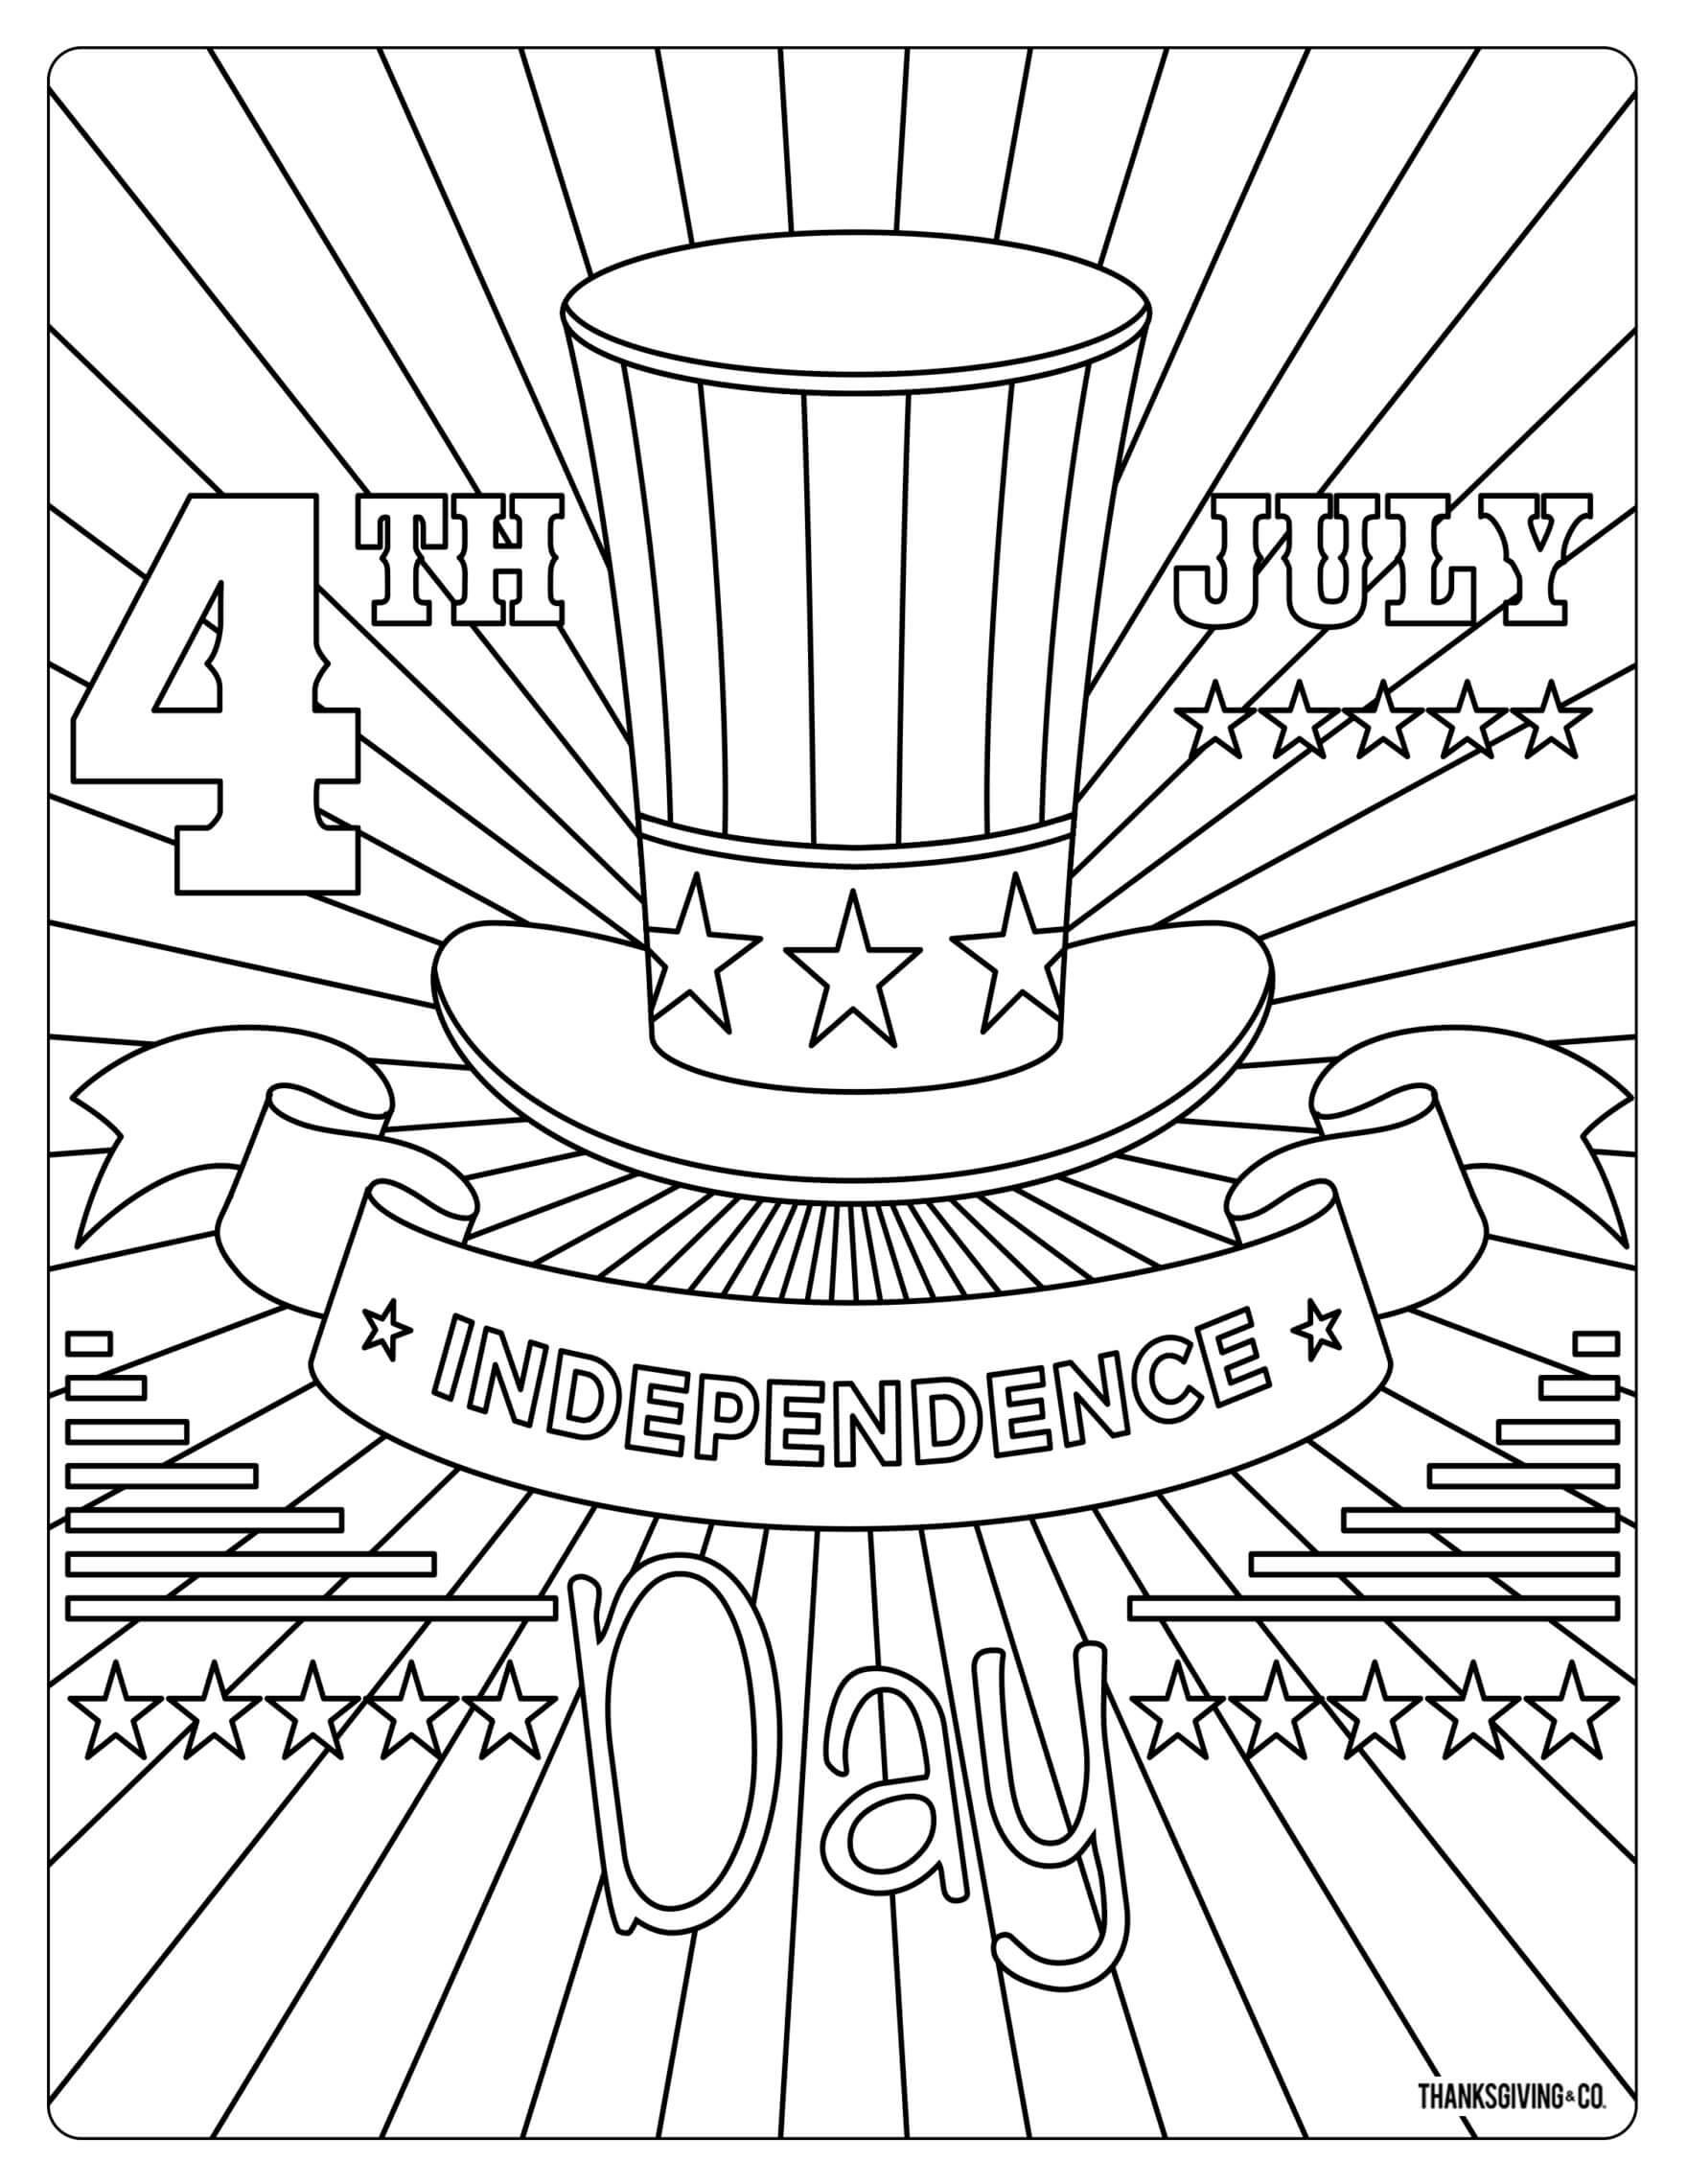 27 Printable Independence Day (4th of July) Coloring Pages - Happier Human